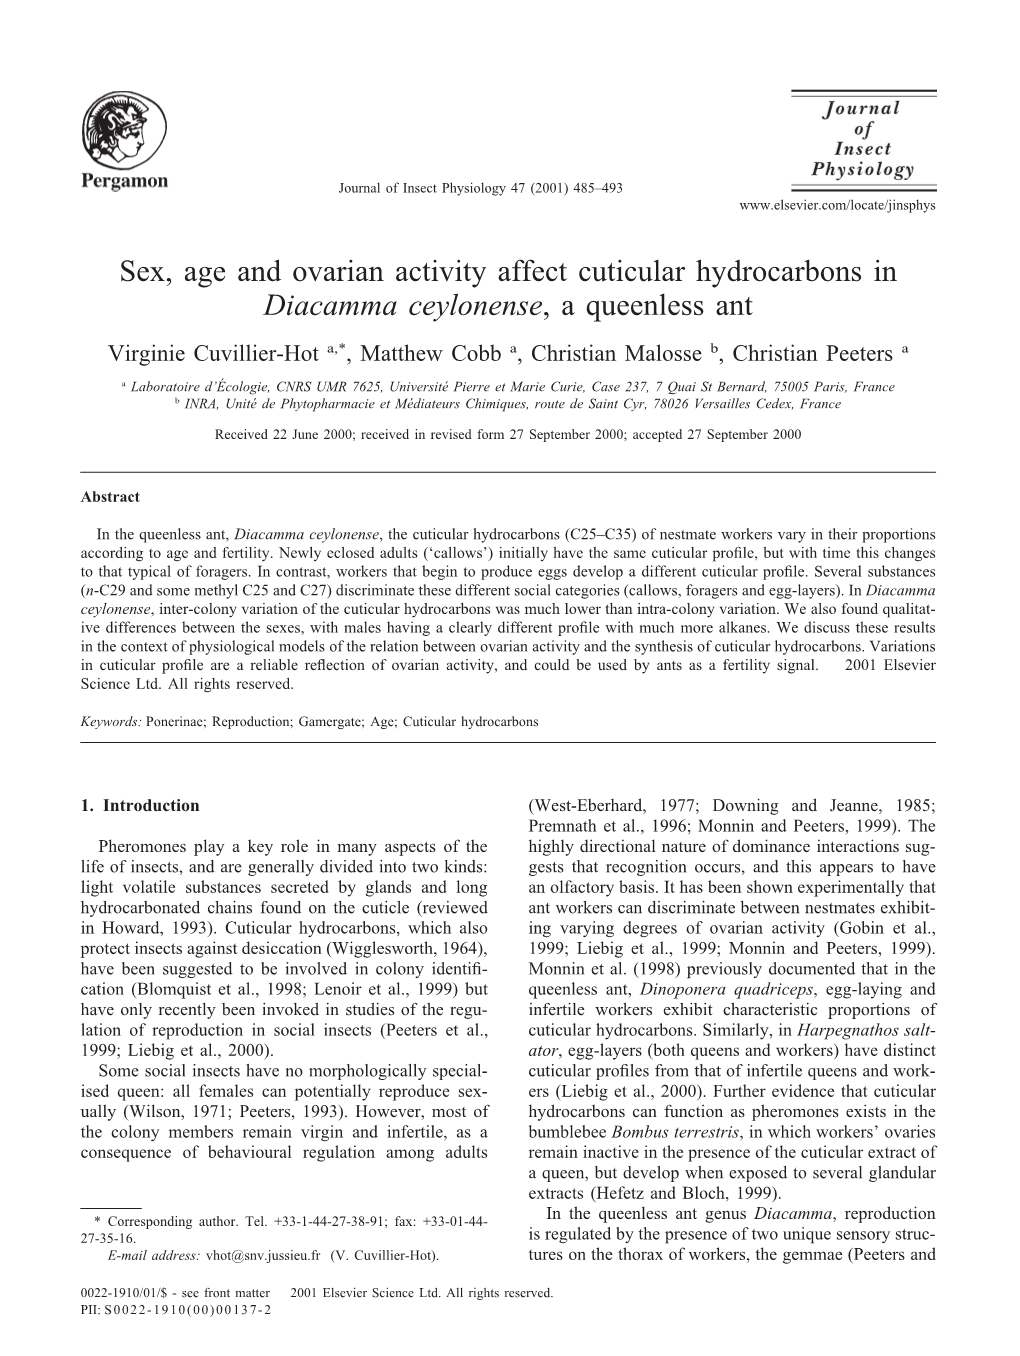 Sex, Age and Ovarian Activity Affect Cuticular Hydrocarbons in Diacamma Ceylonense, a Queenless